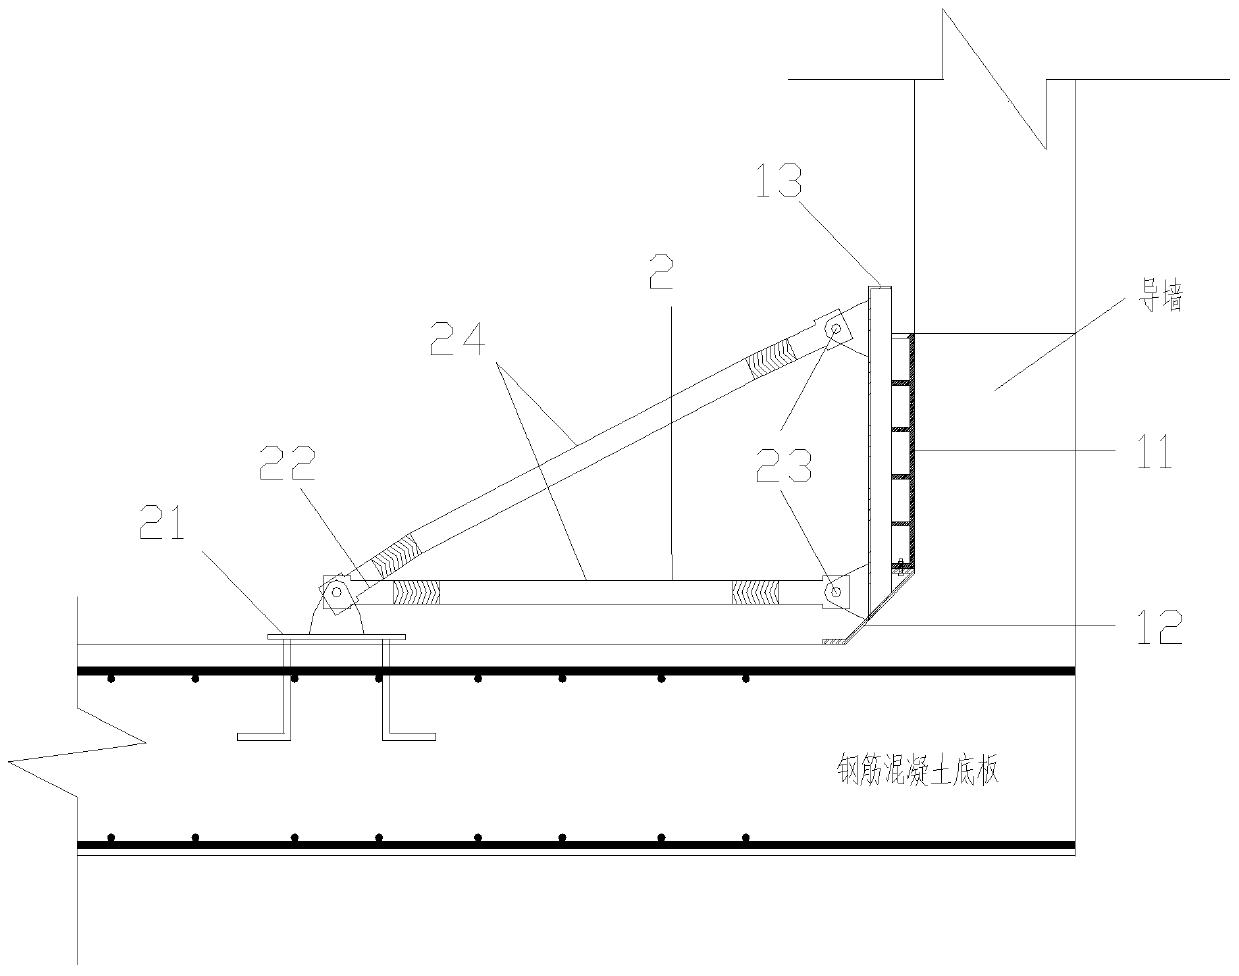 Underground finite space fertilizer-tank-free structure side wall large steel formwork system and construction method